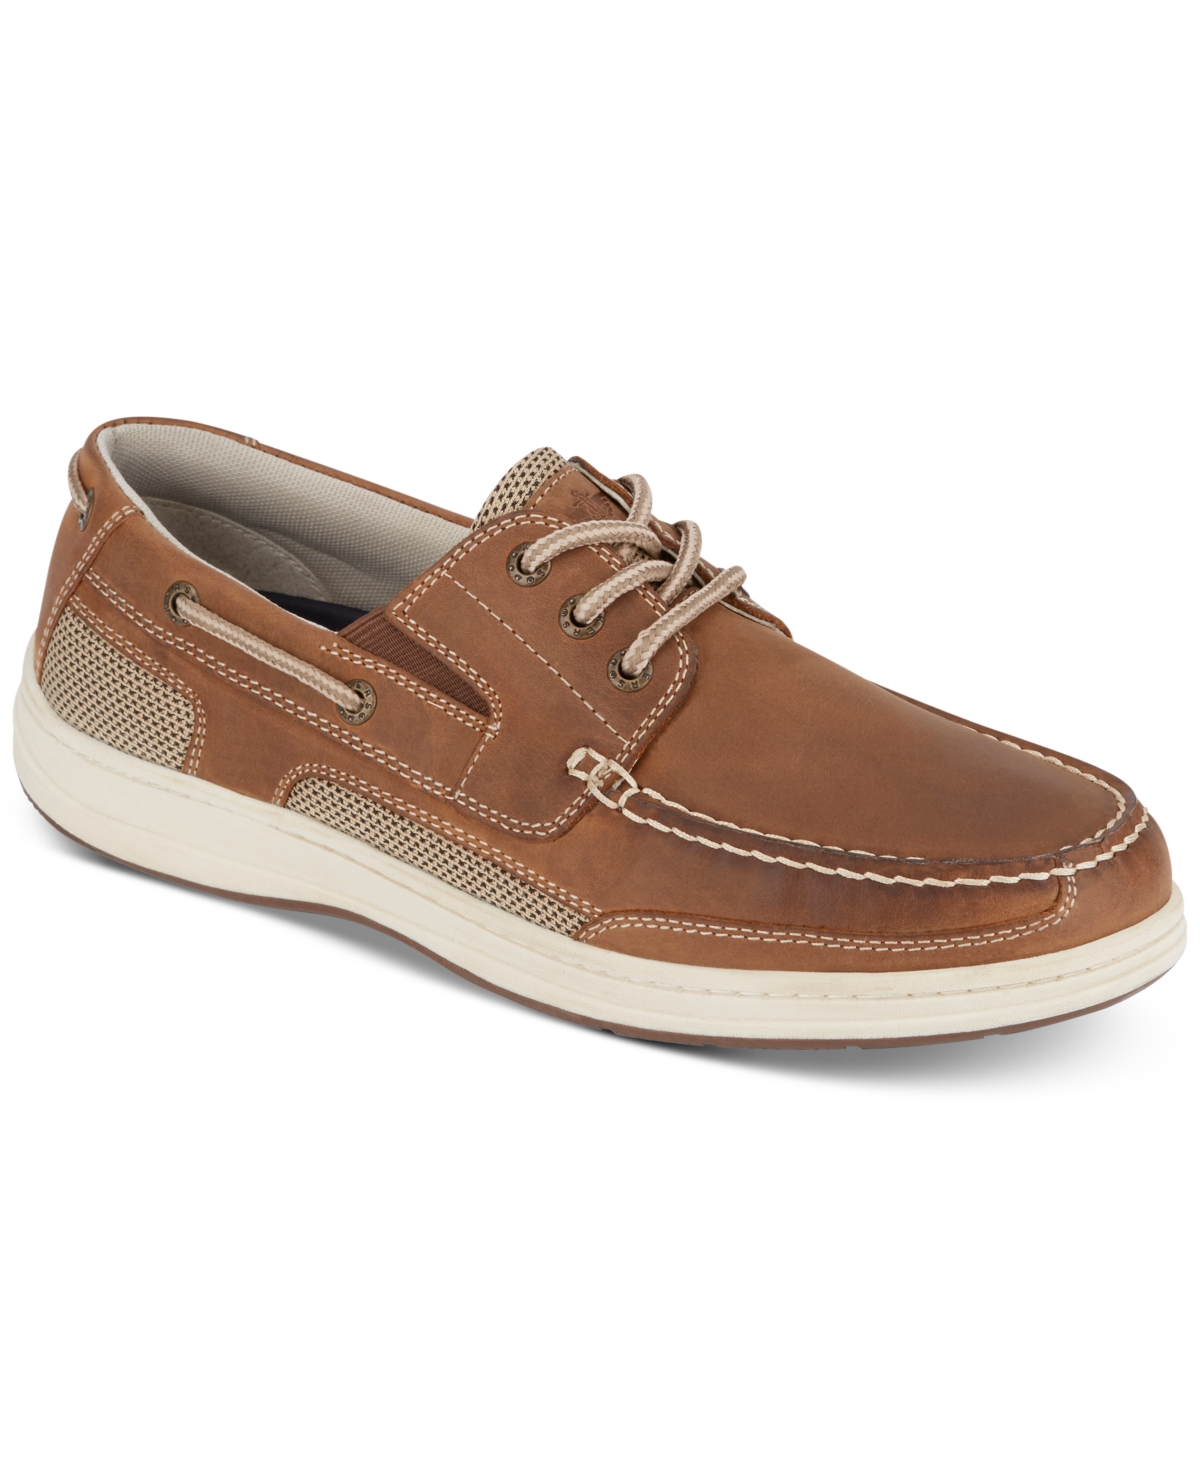 Men's Beacon Leather Casual Boat Shoe with NeverWet - Tan